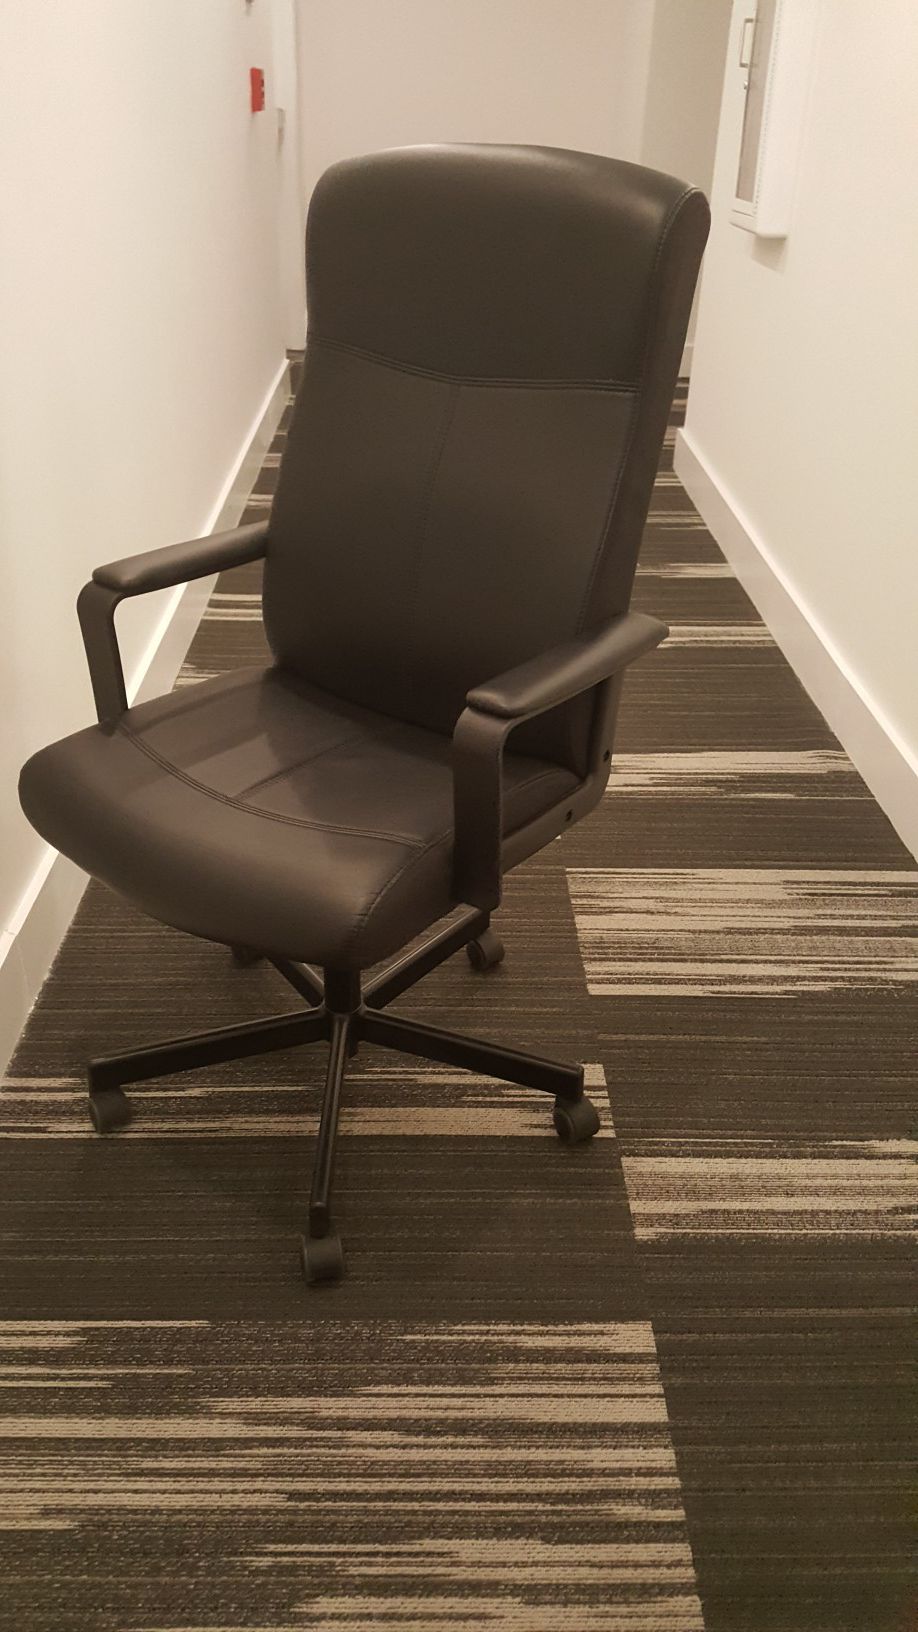 Several Office Chairs For Sale. Unique Opportunity!!